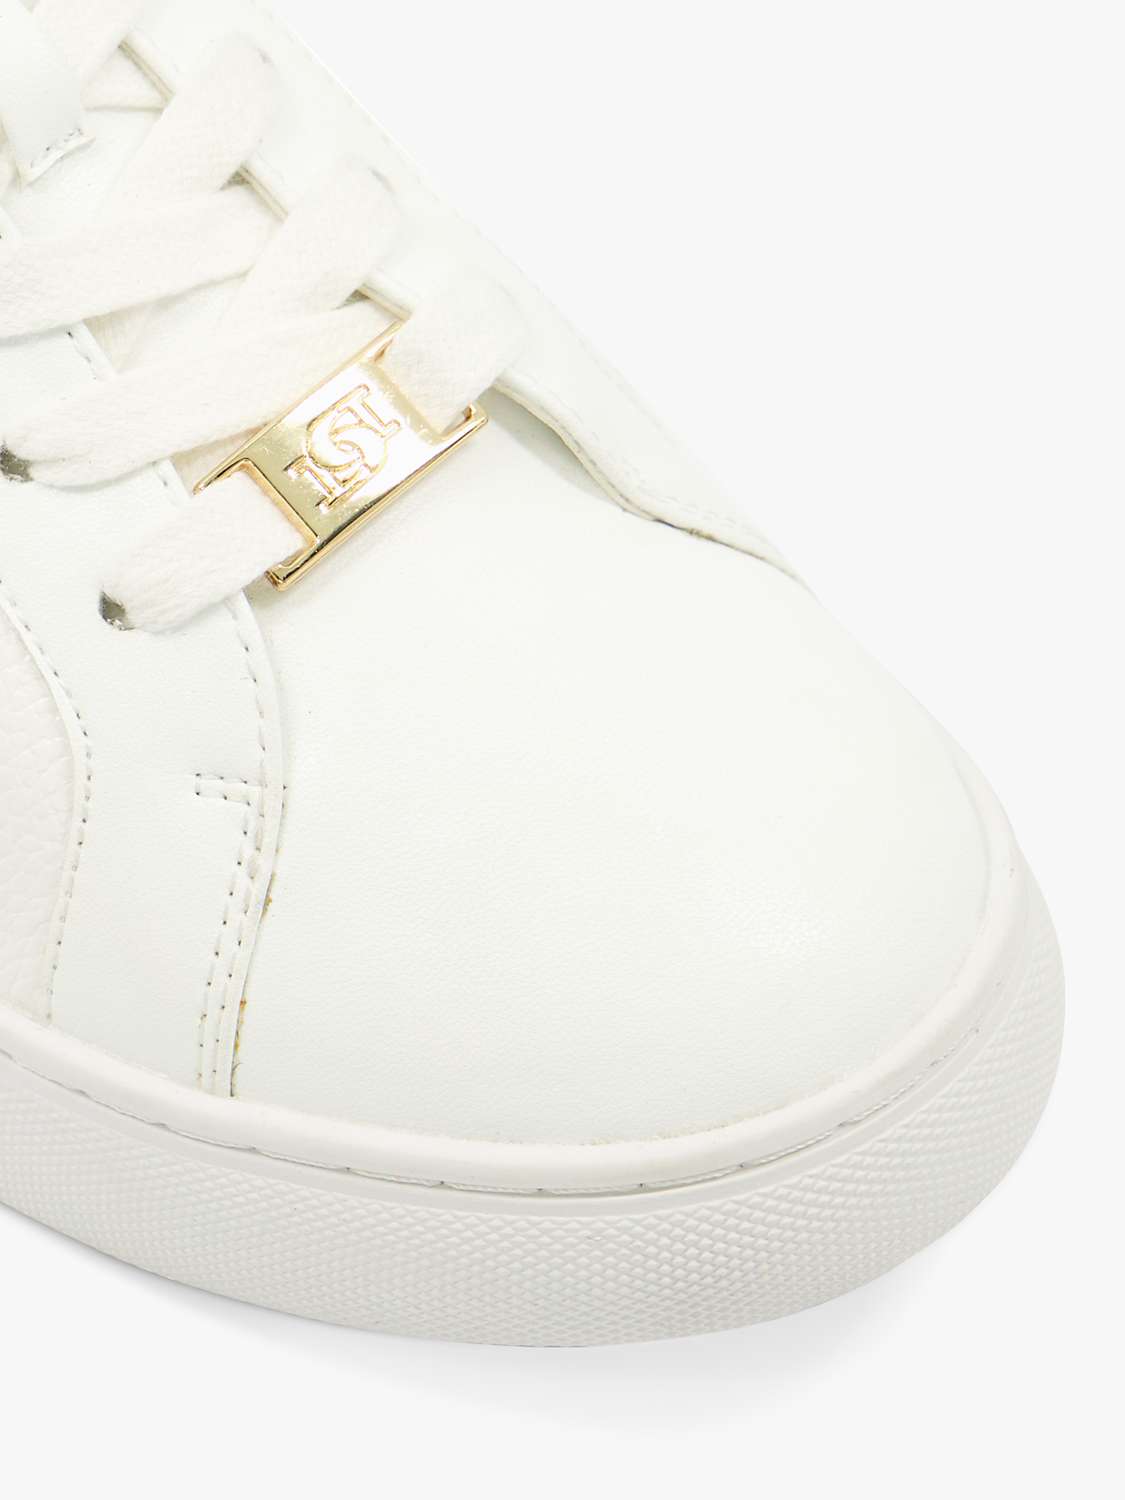 Buy Dune Wide Fit Everleigh Trainers, White Online at johnlewis.com